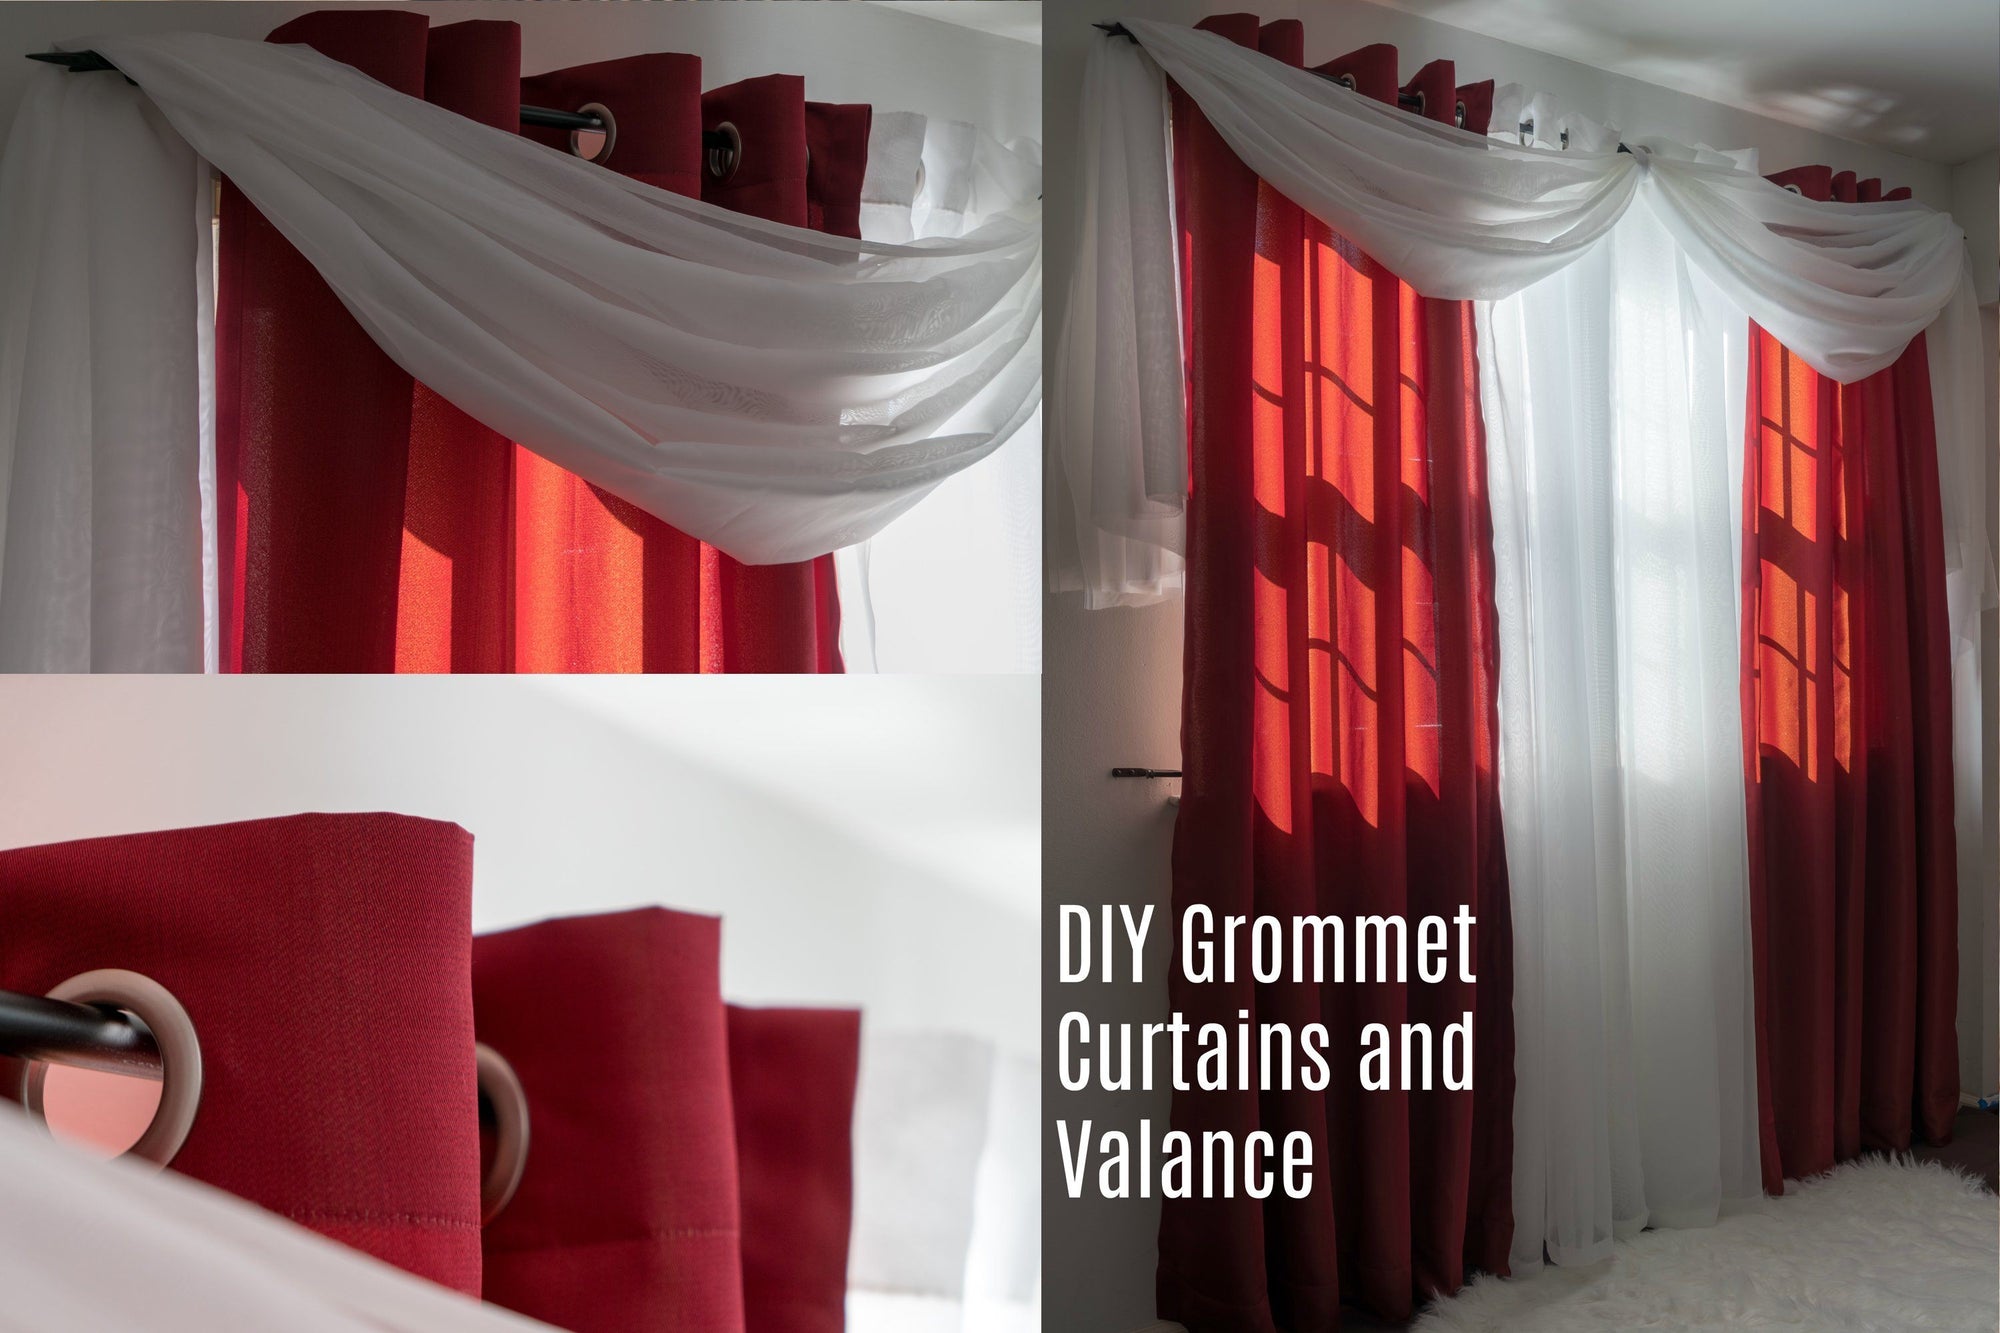 DIY Grommet Curtains and Valance